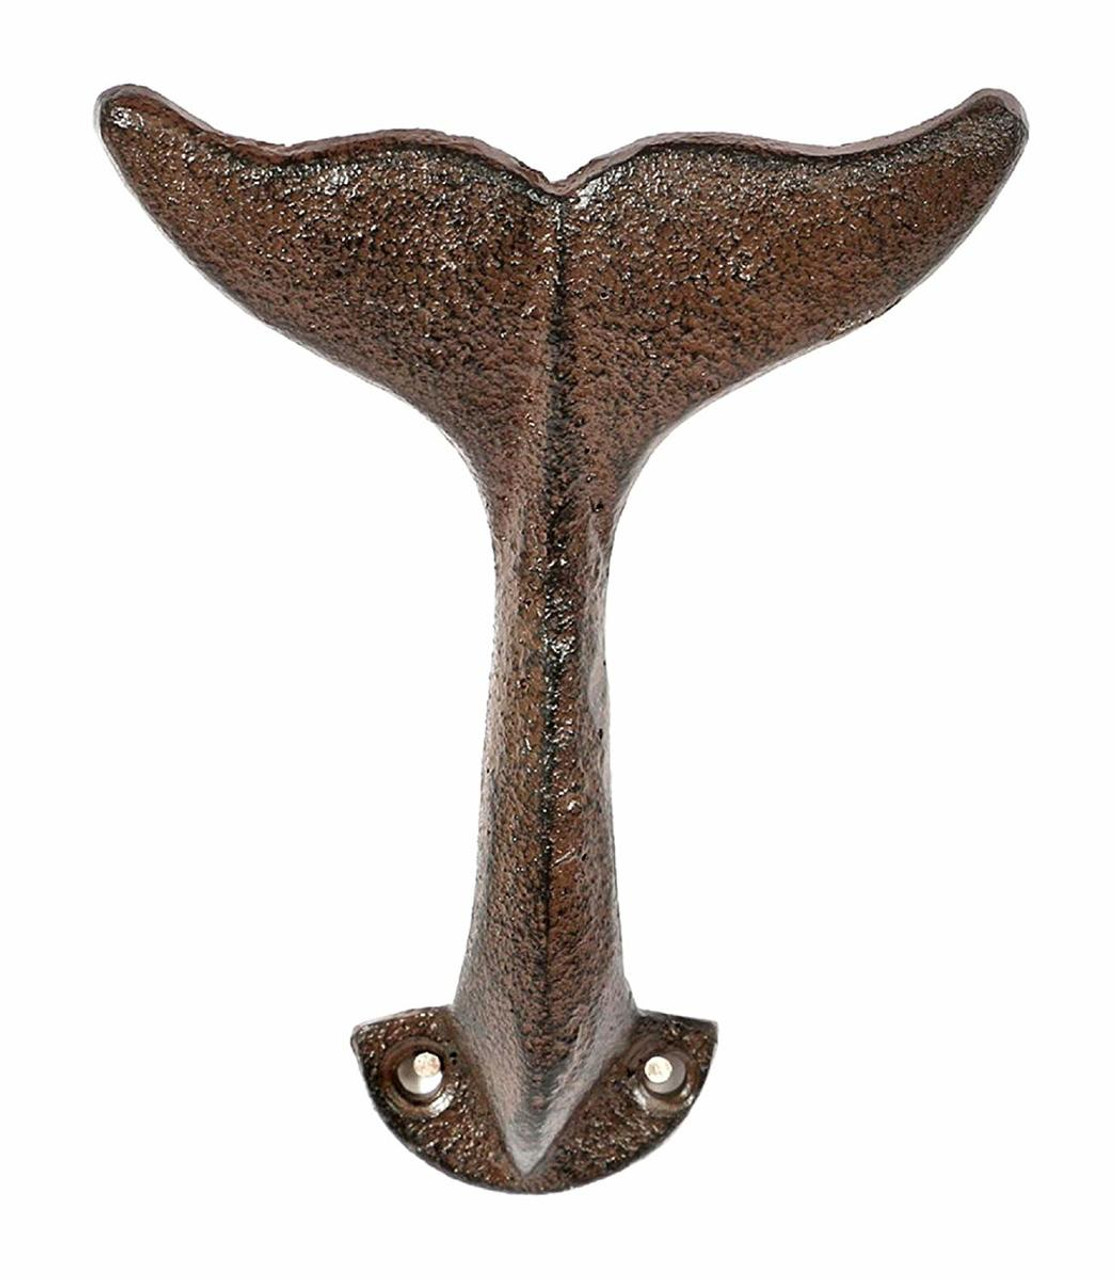 Antiqued Metal Whale Wall Hook 20117 - ColorfulCritters